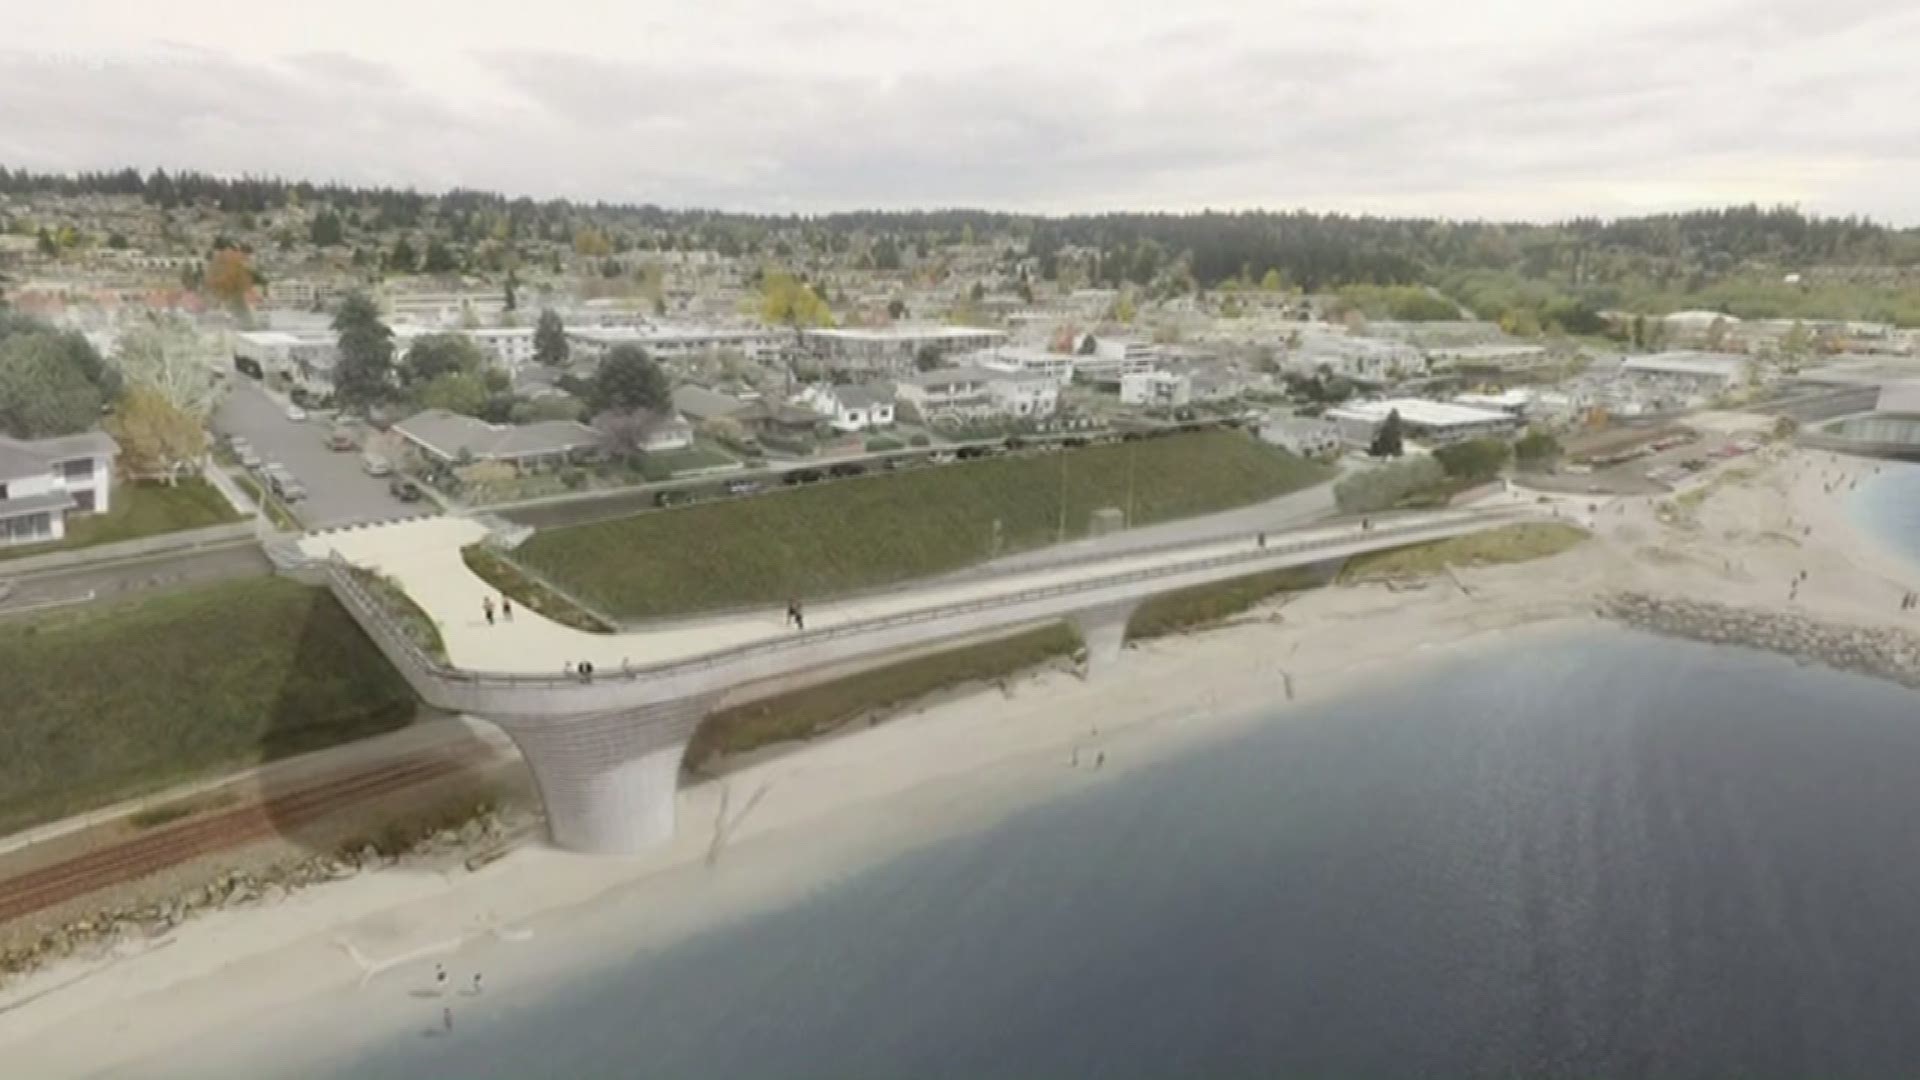 An emergency overpass is being considered for the Edmonds waterfront, but some neighbors are against the idea. KING 5's Amy Moreno reports.